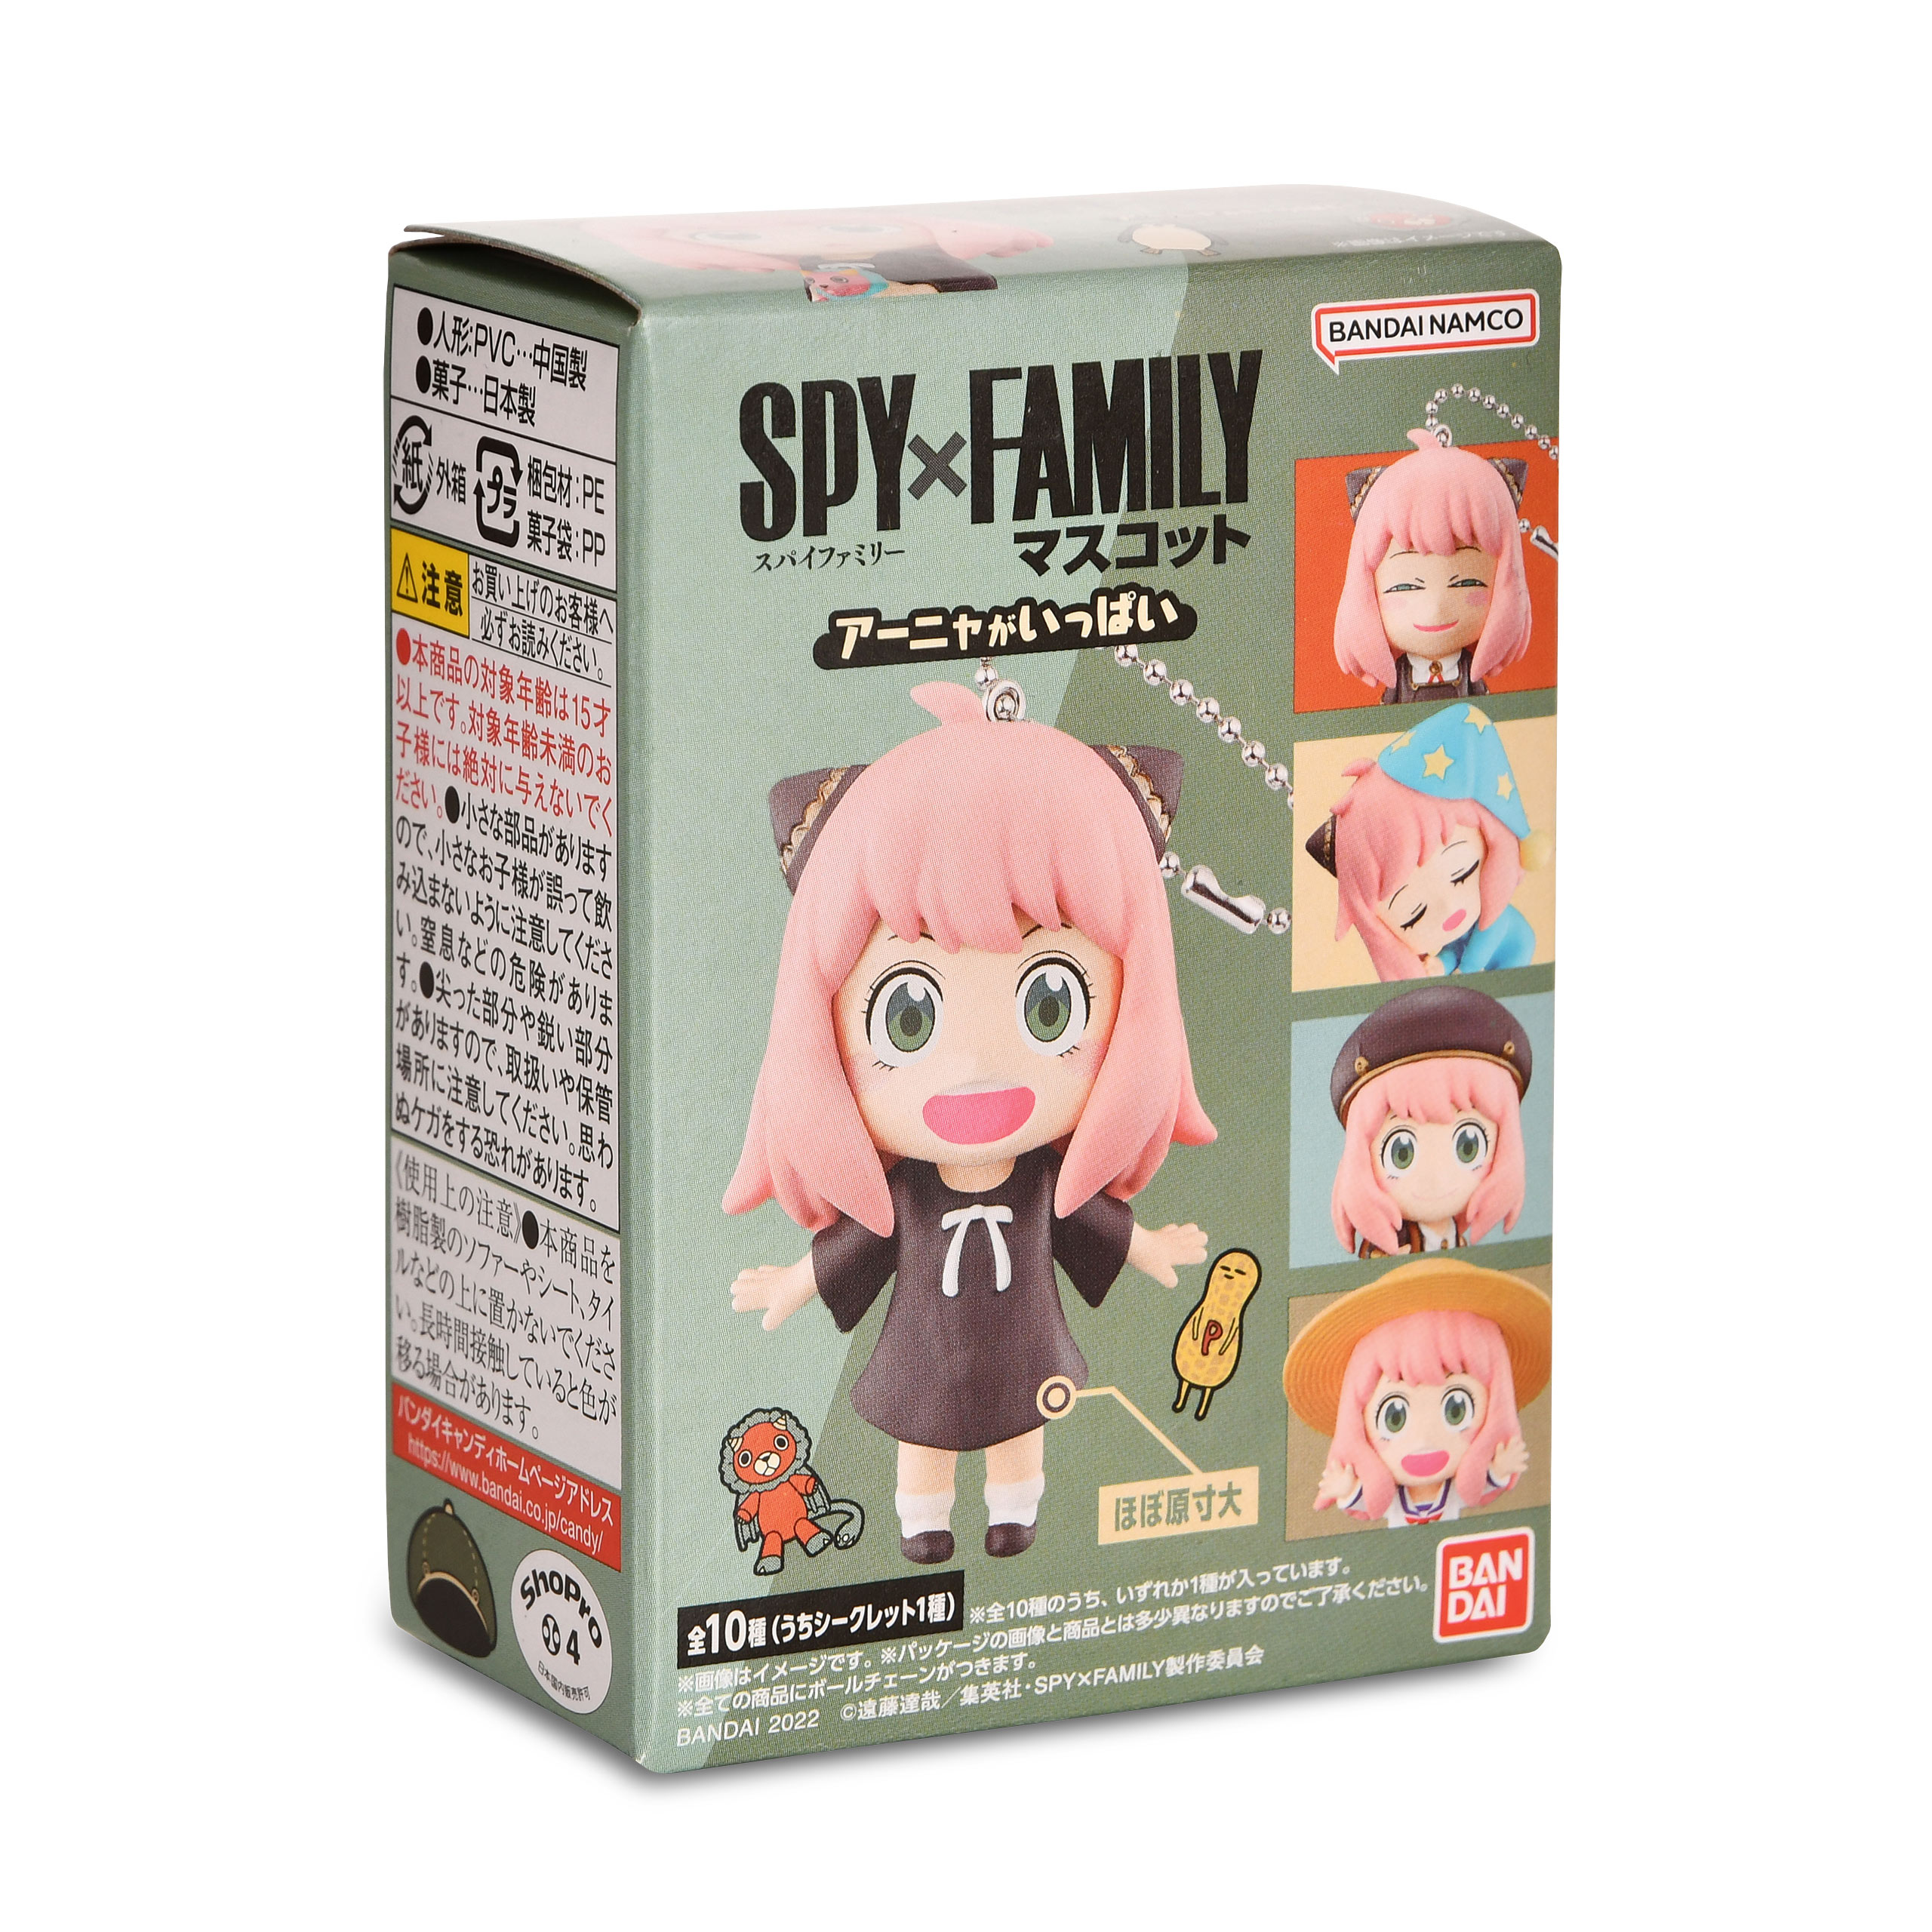 Spy x Family - Anya Forger Emotions Mystery Backpack Anhänger